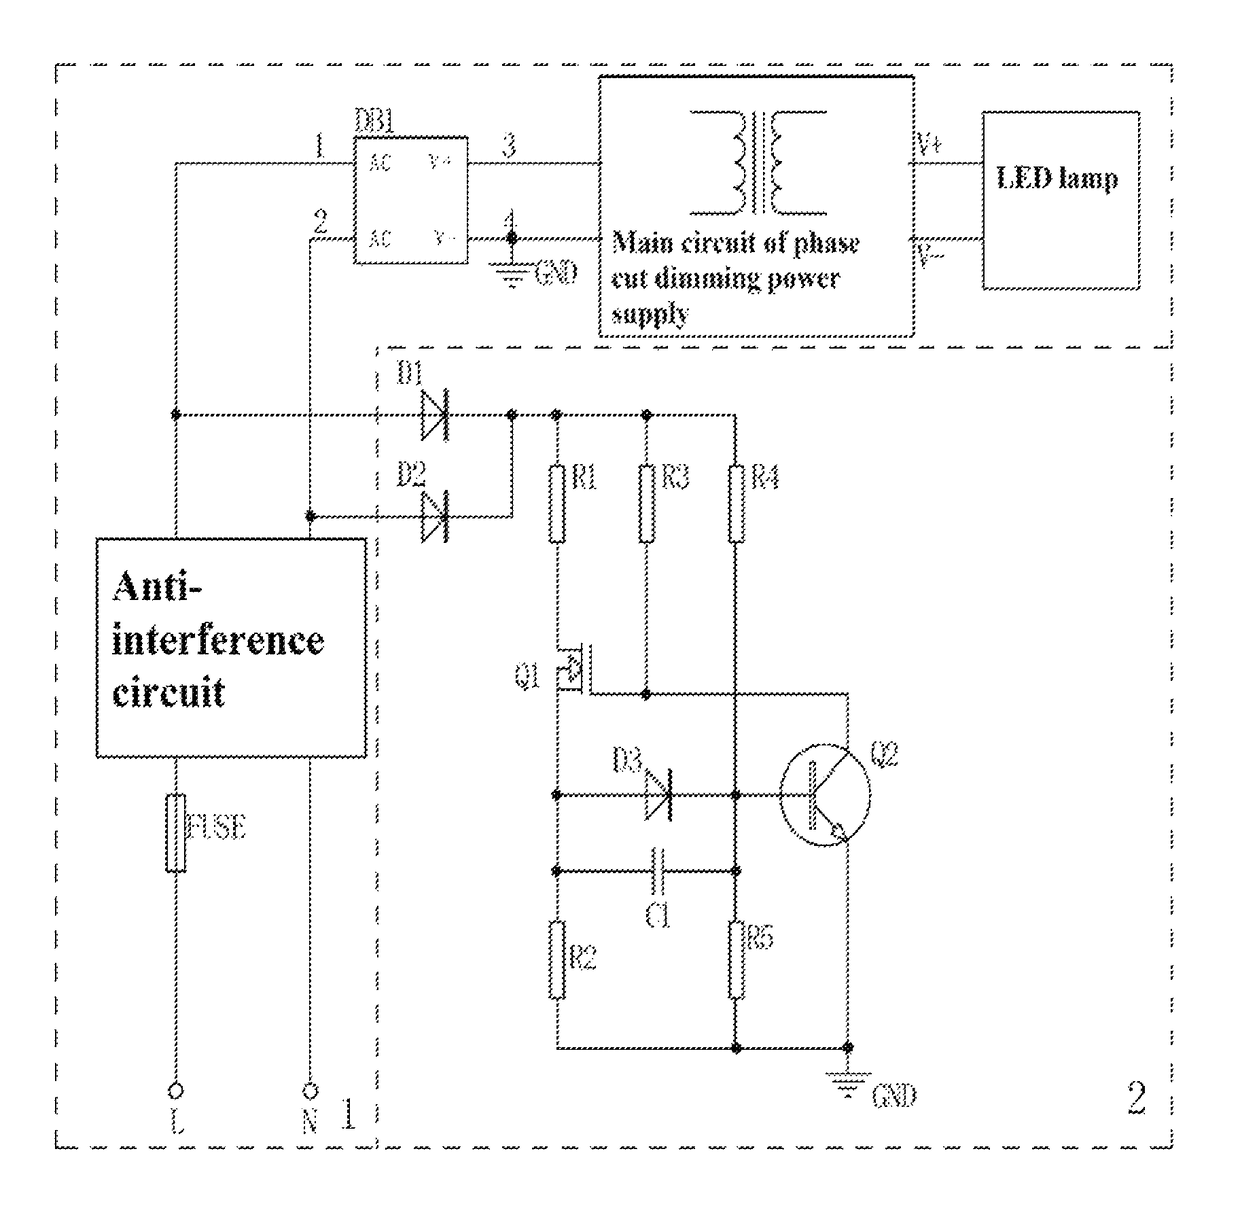 Dimmer holding current control circuit for phase cut dimming power supply